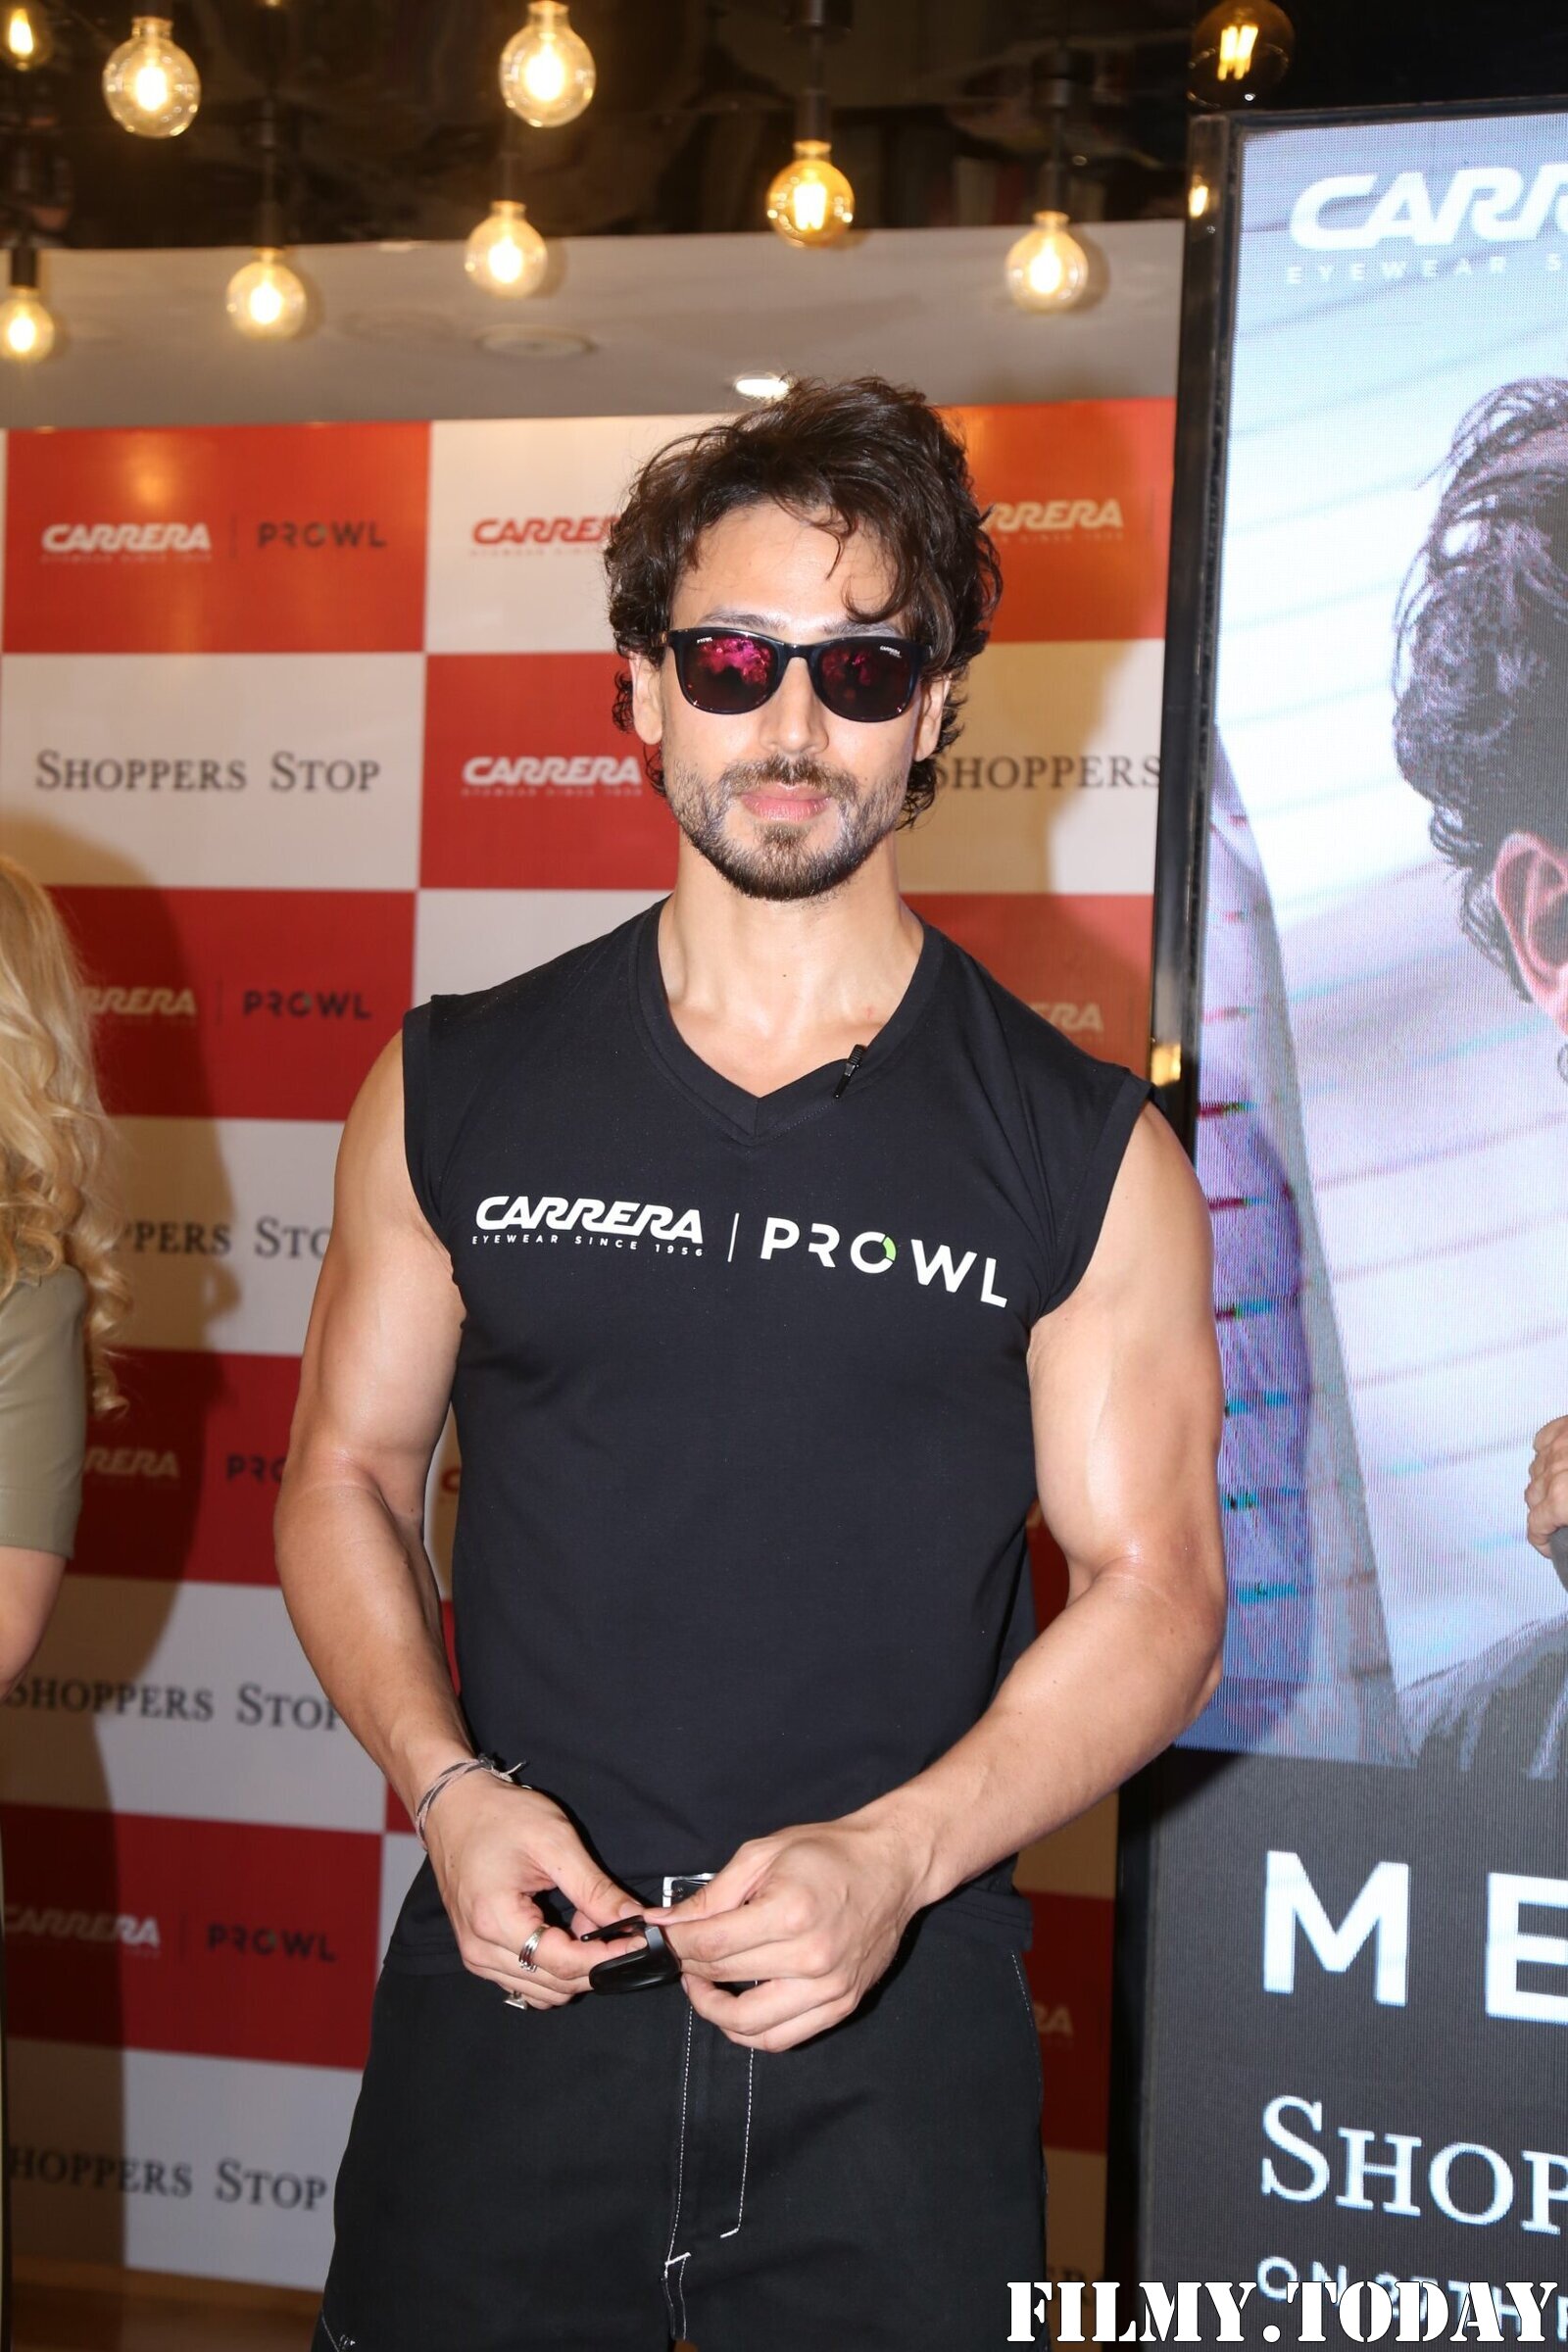 Photos: Tiger Shroff At The Launch Of ‘Carrera X Prowl’ Eyewear Collection | Picture 1923069